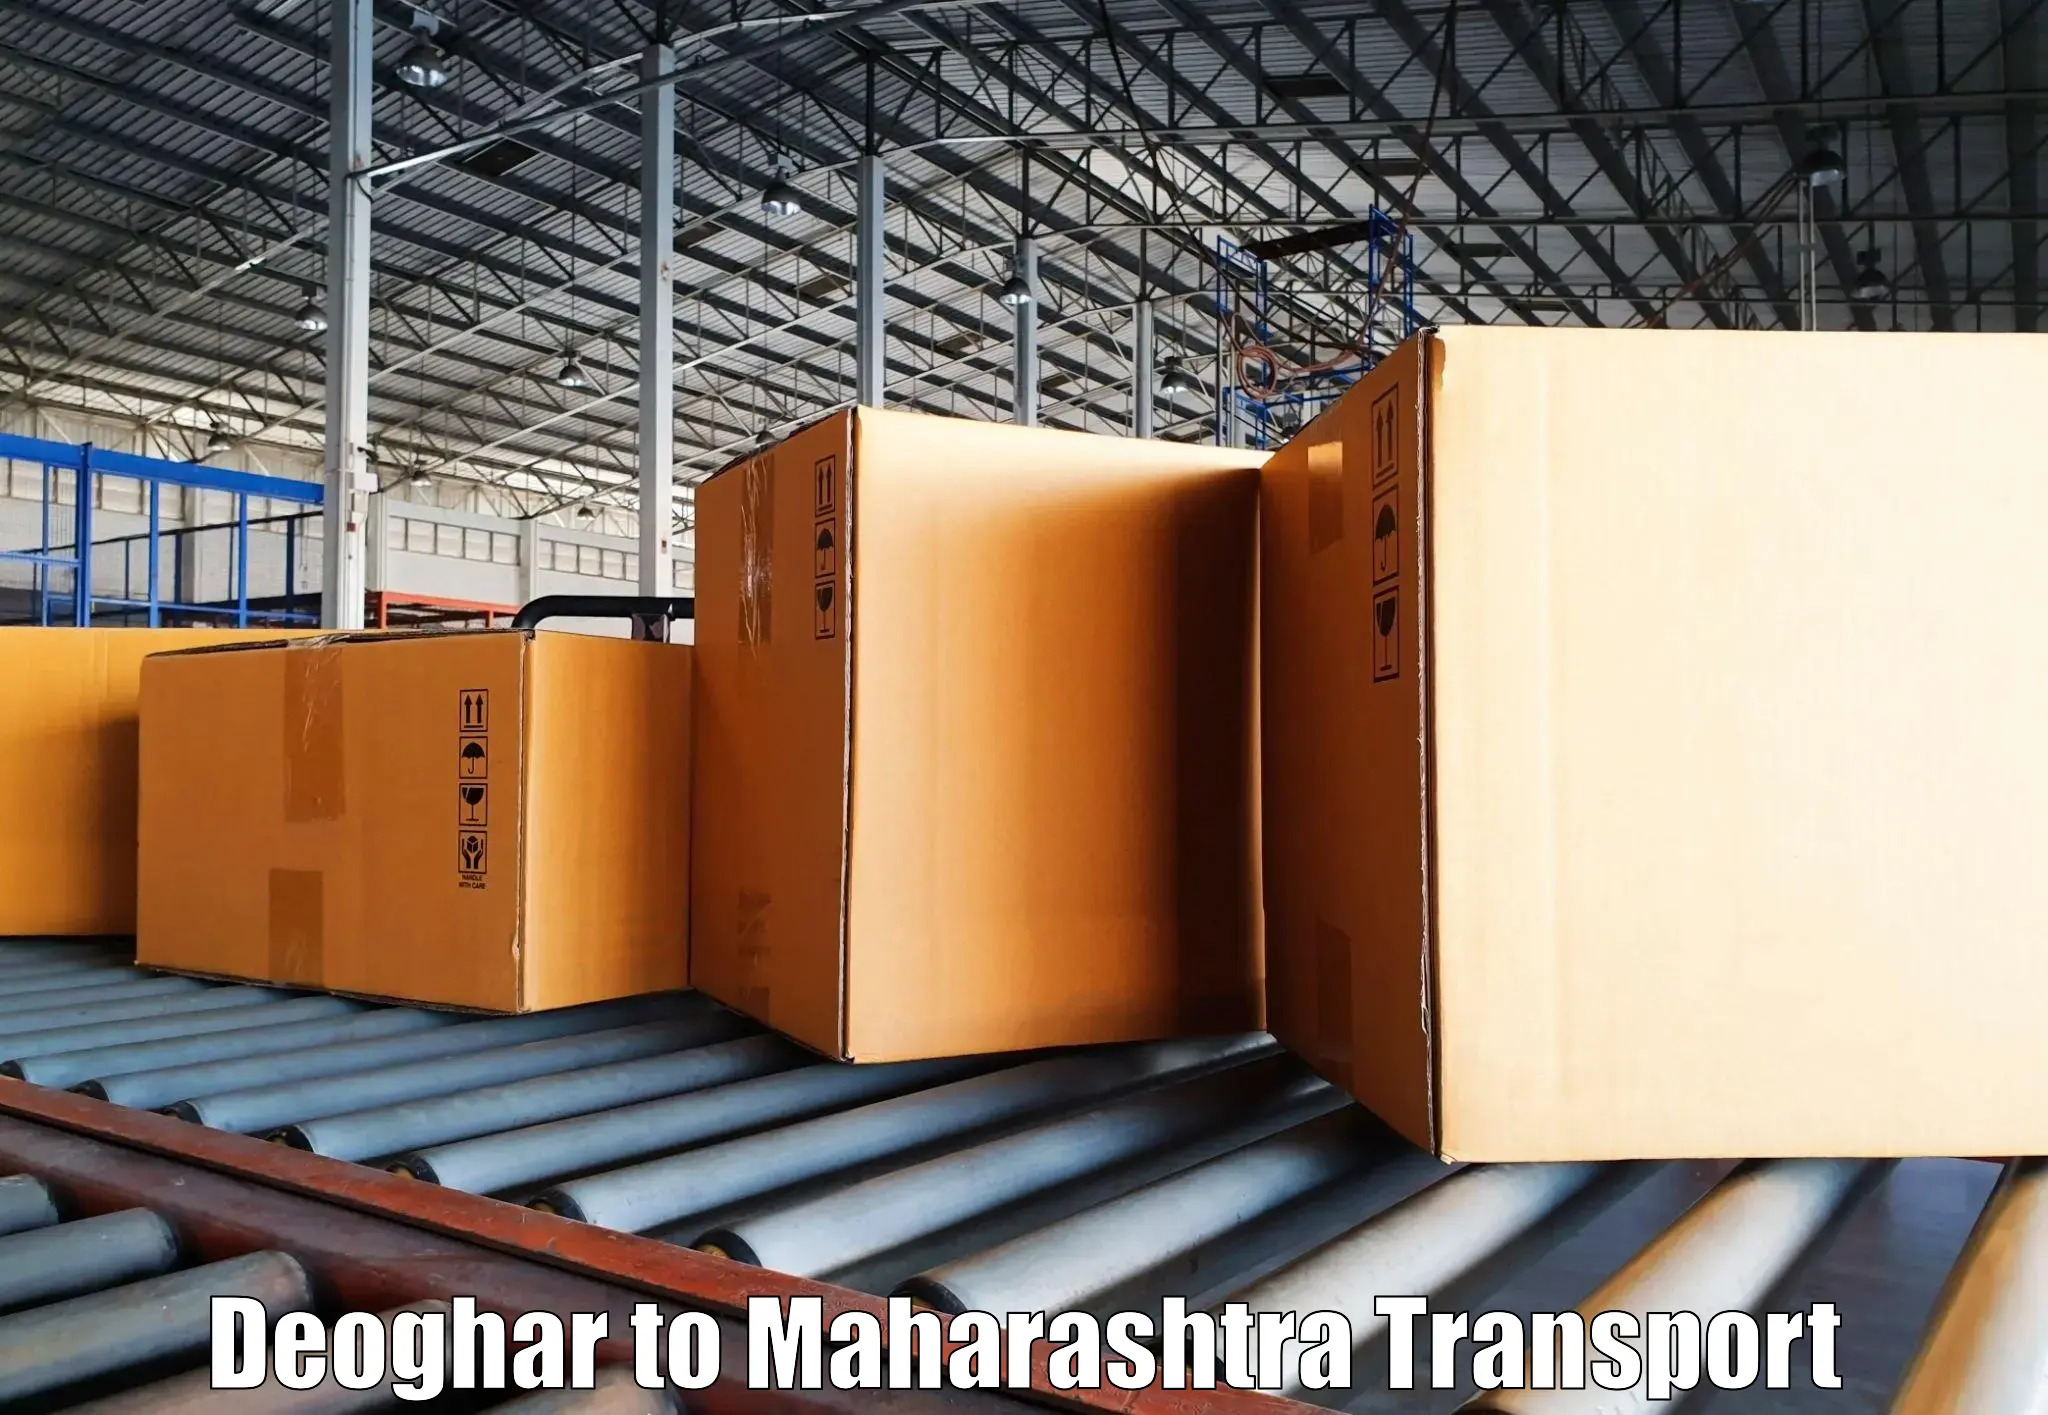 Daily parcel service transport Deoghar to Parbhani